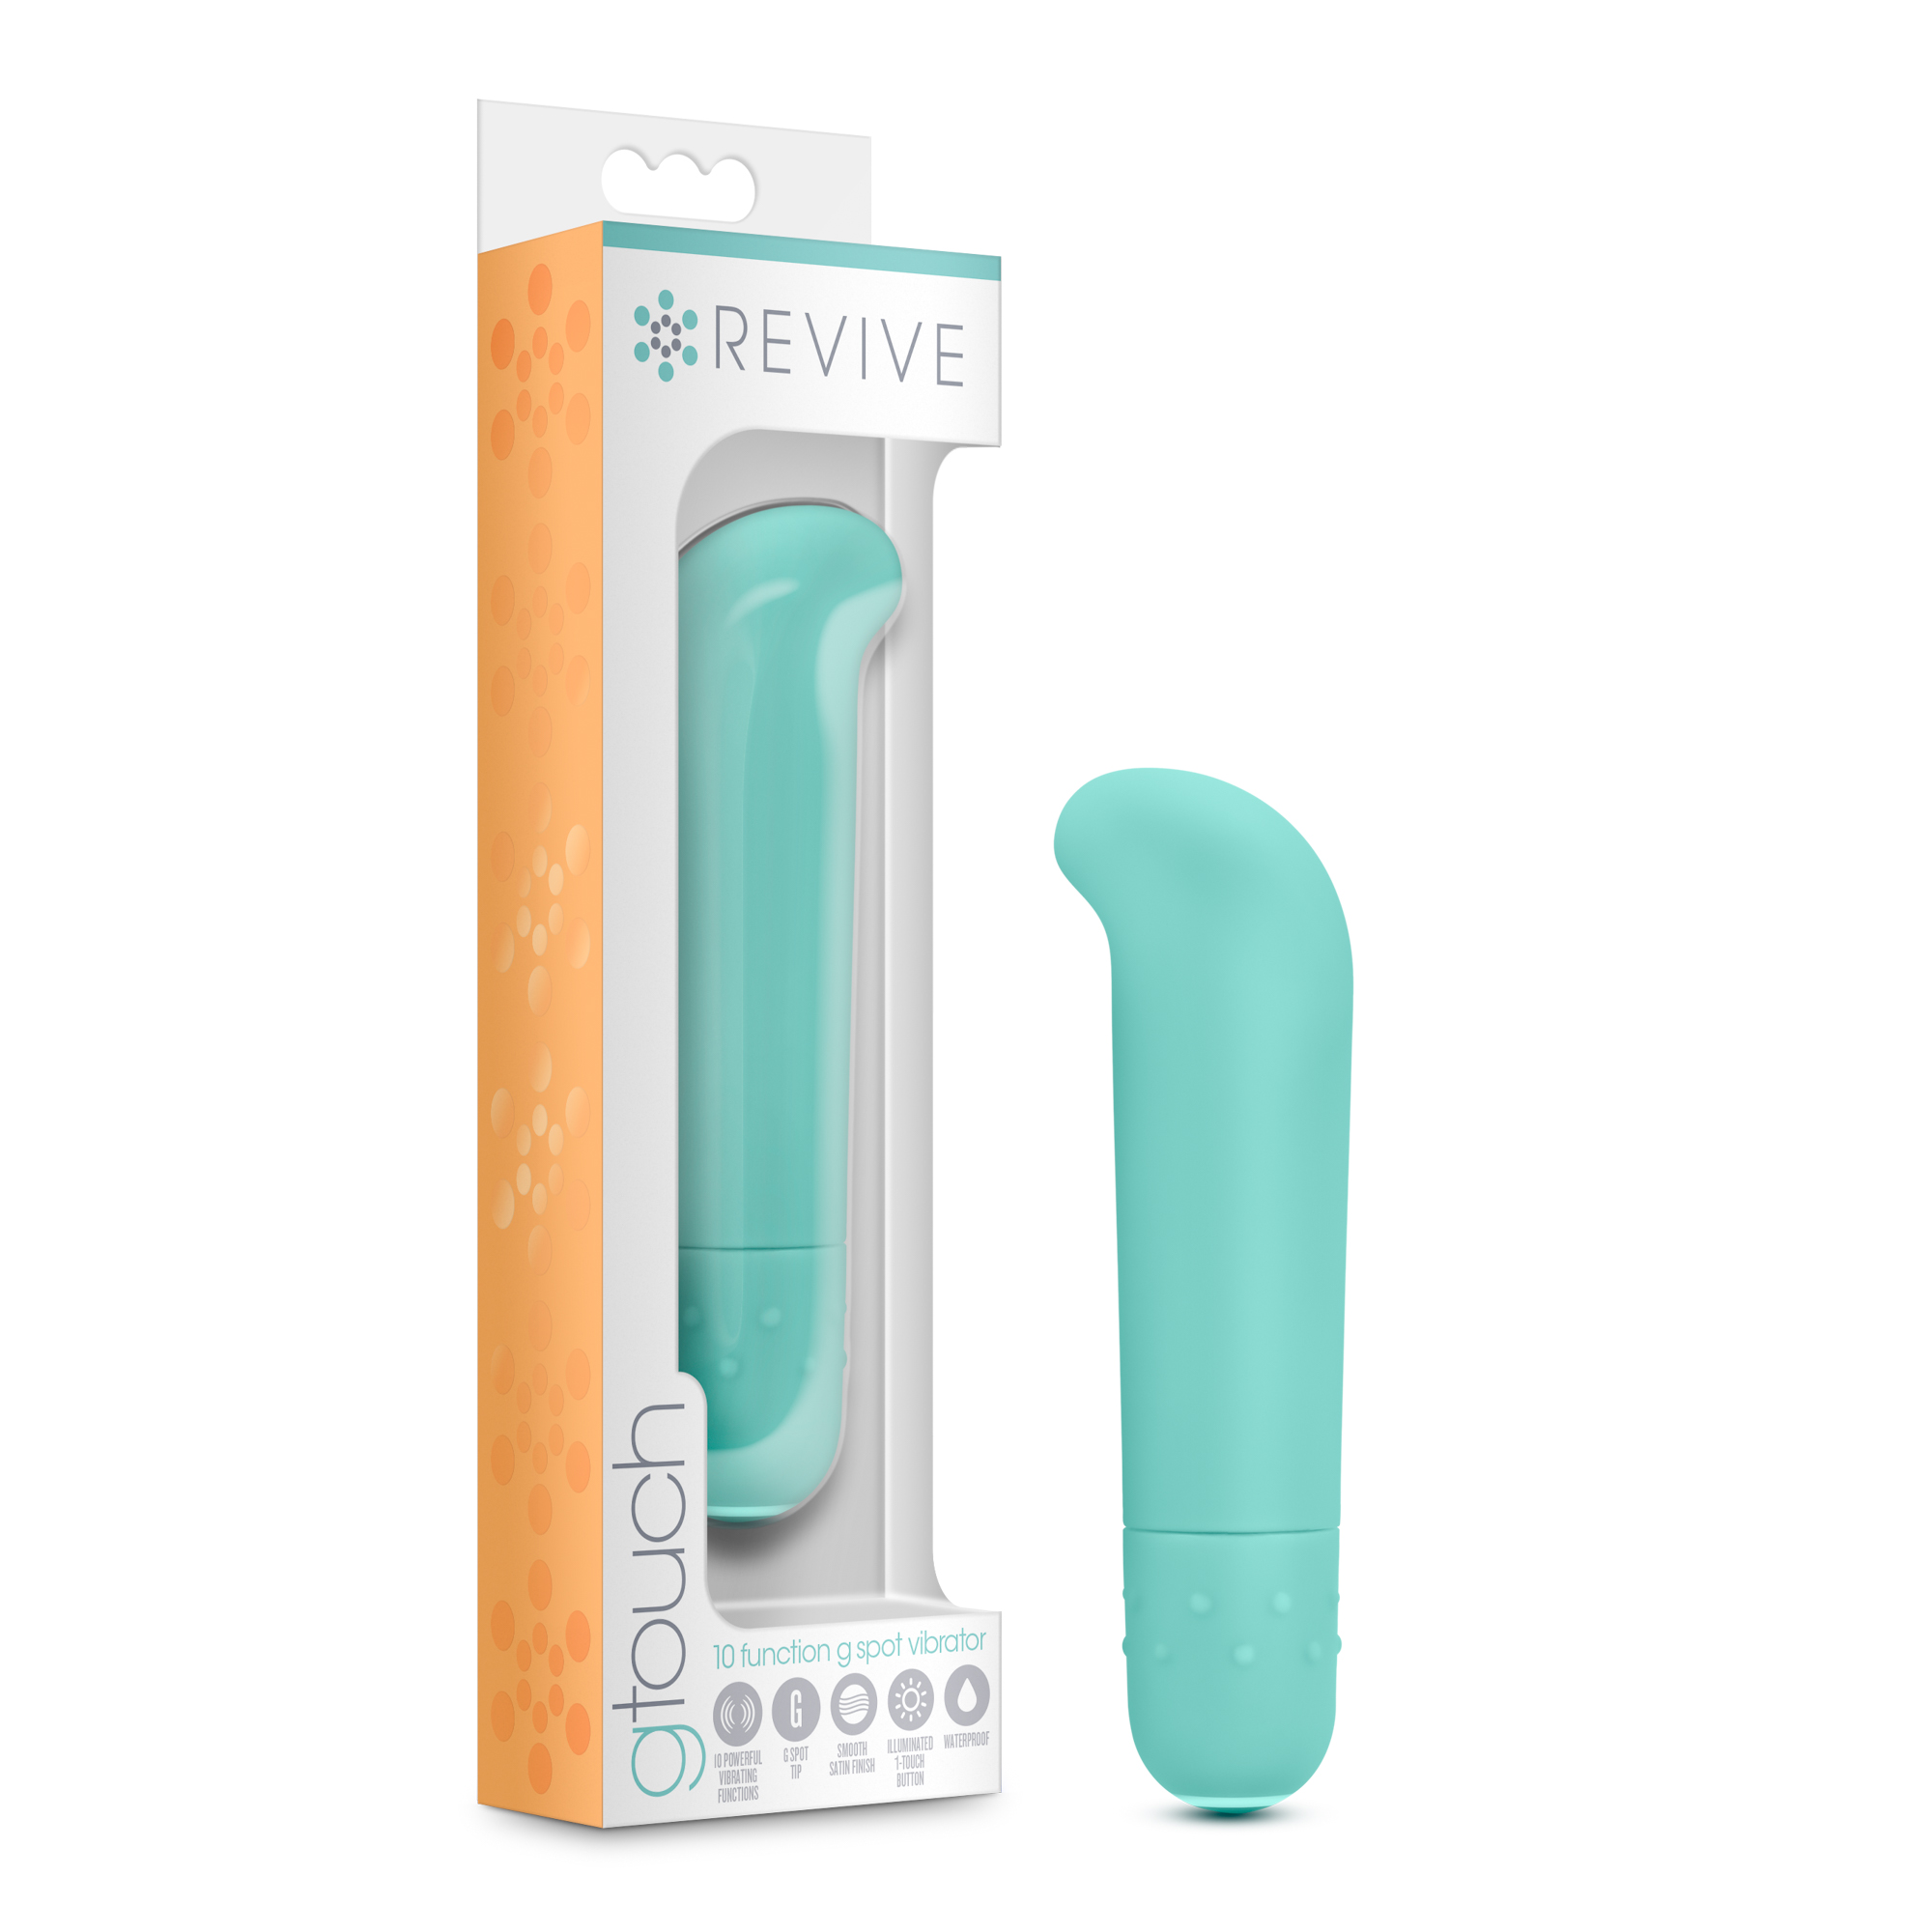 Revive G Touch - 10 Function G- Spot Vibrator -  Tiffany Blue